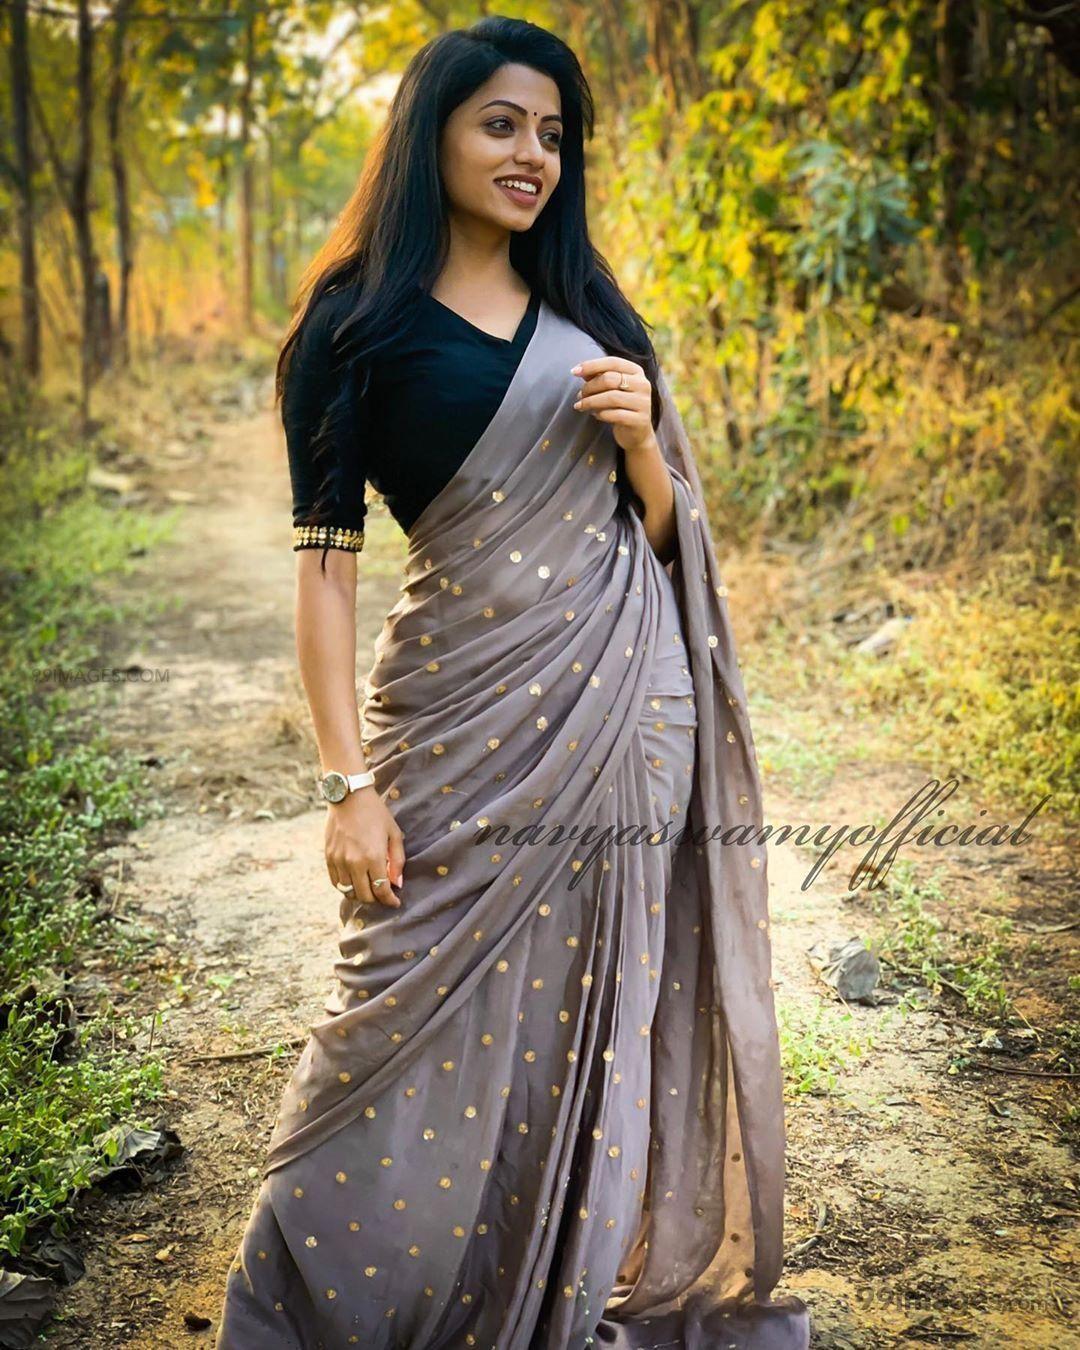 🔥 Indian Girl In Saree HD PNG Images Download | CBEditz